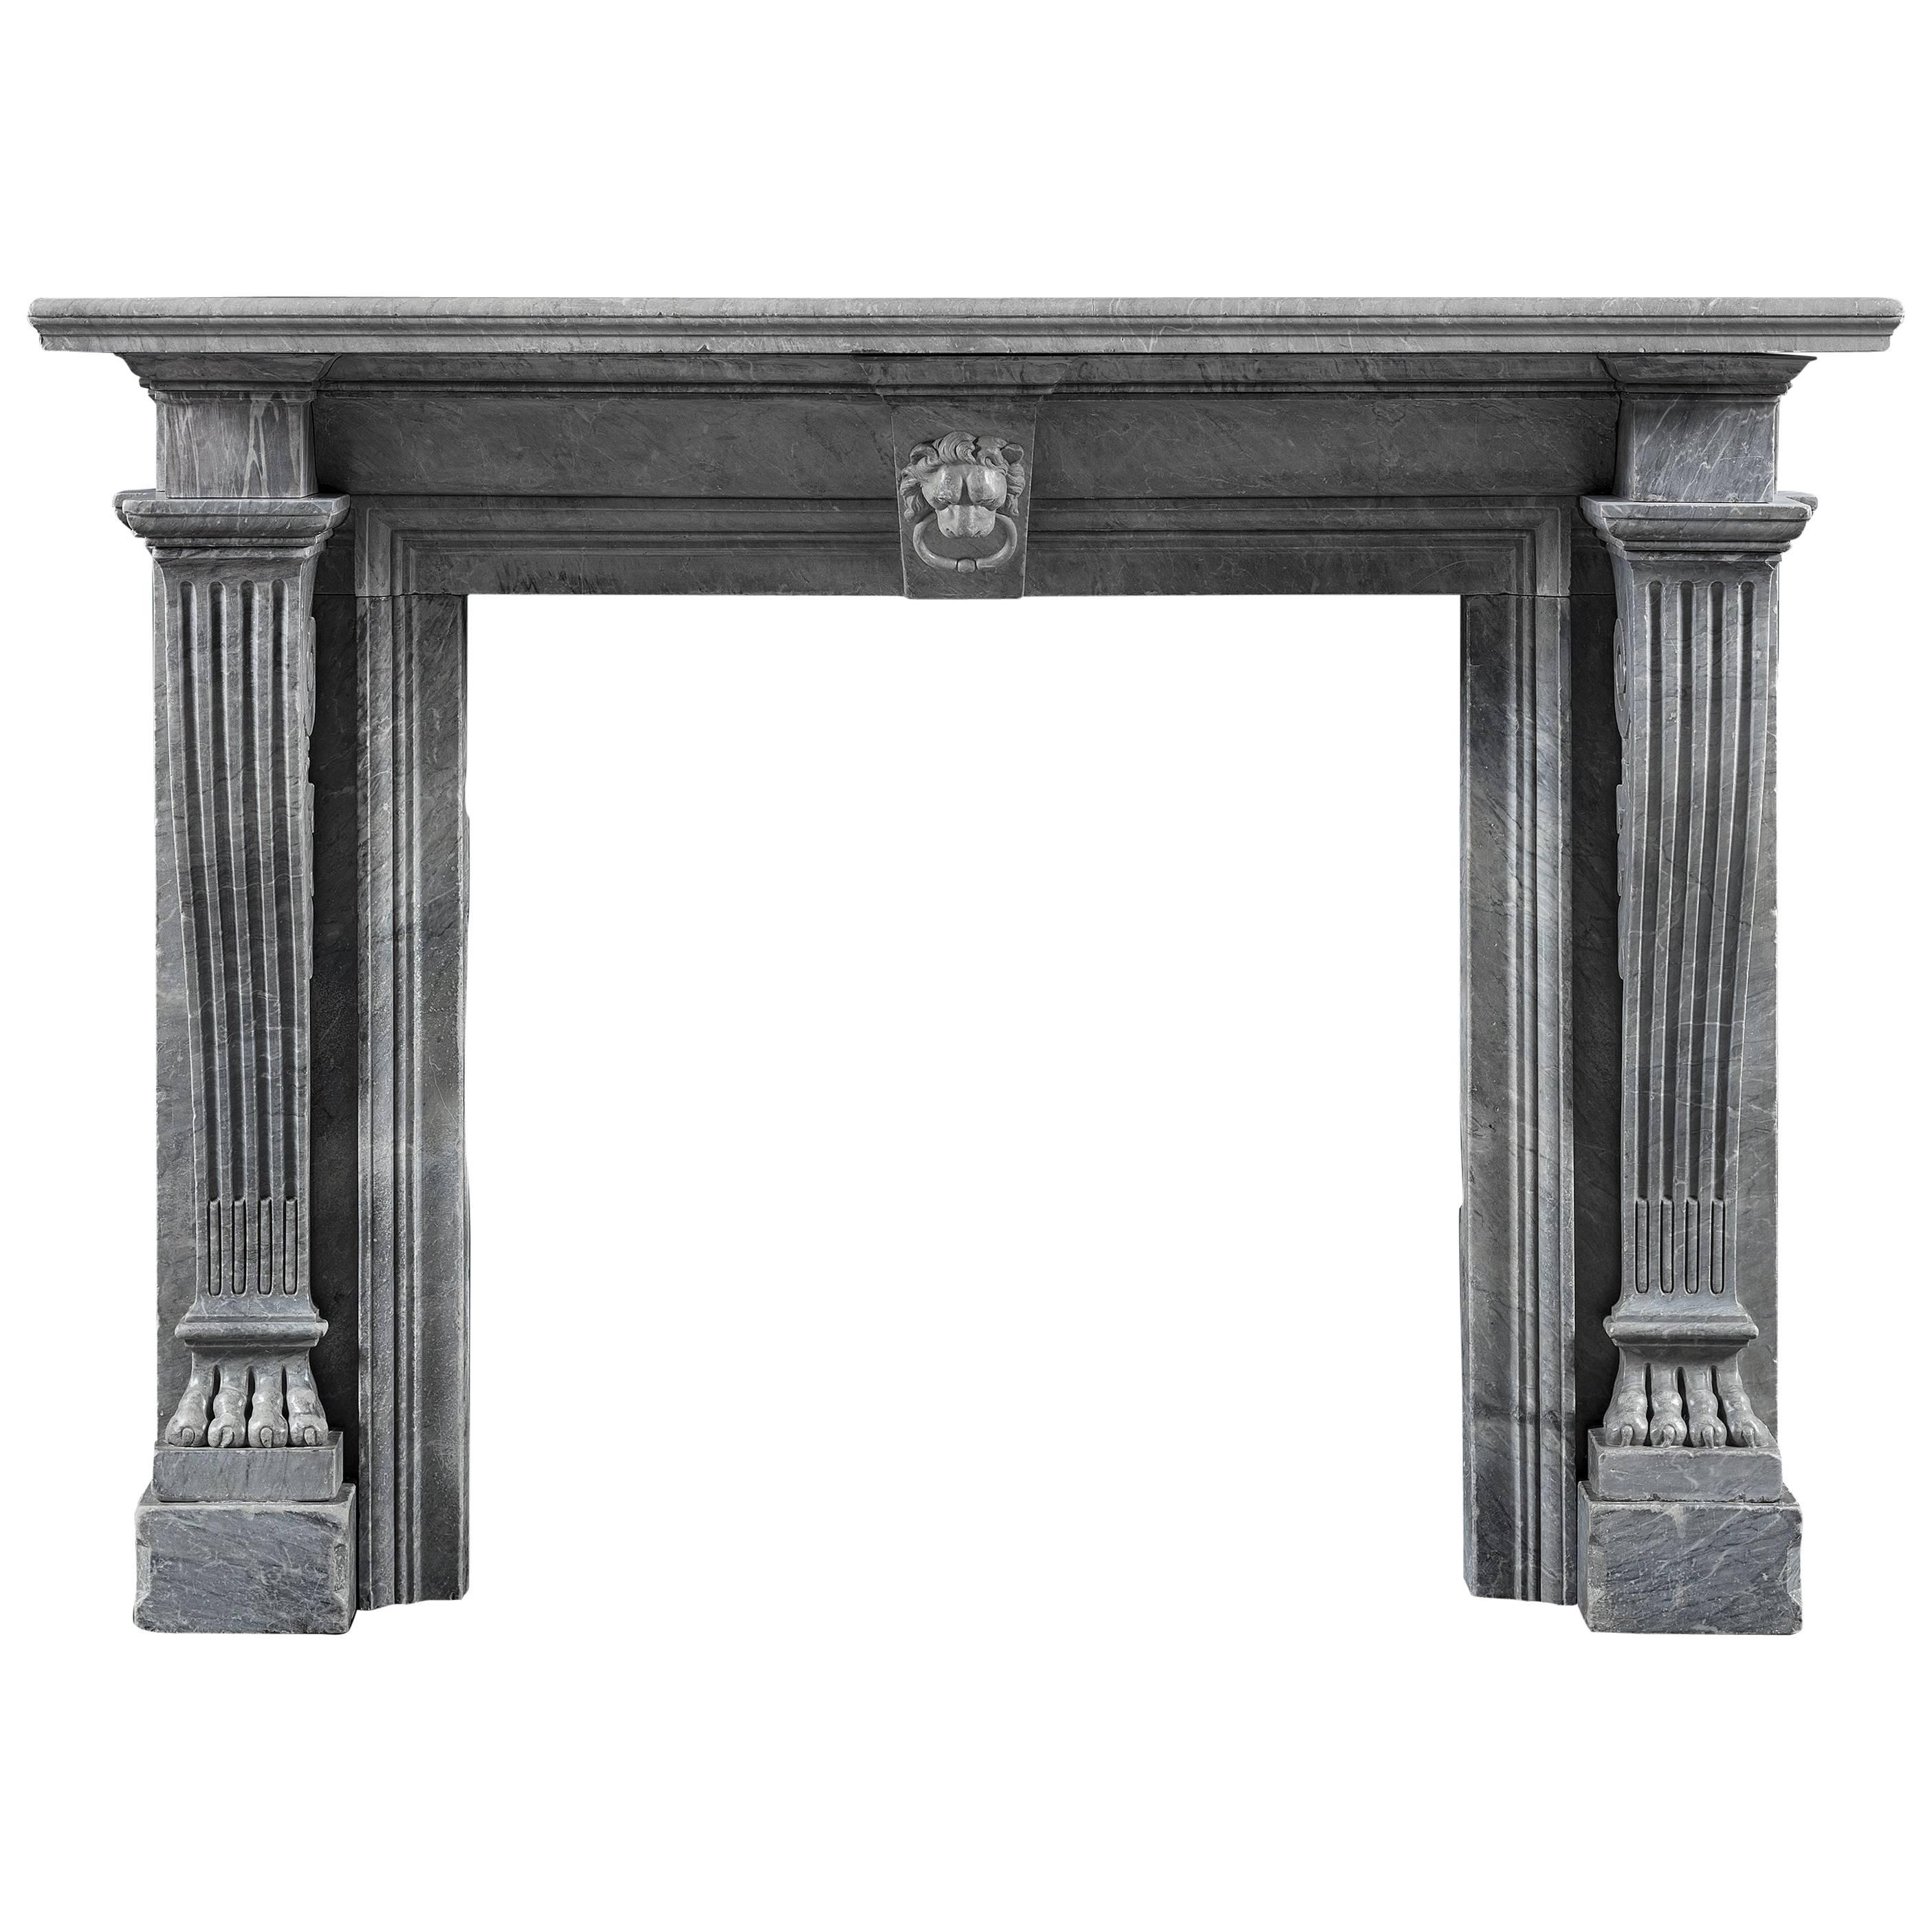 Early 19th Century Chimneypiece of Italian Bardiglio Imperiale Marble